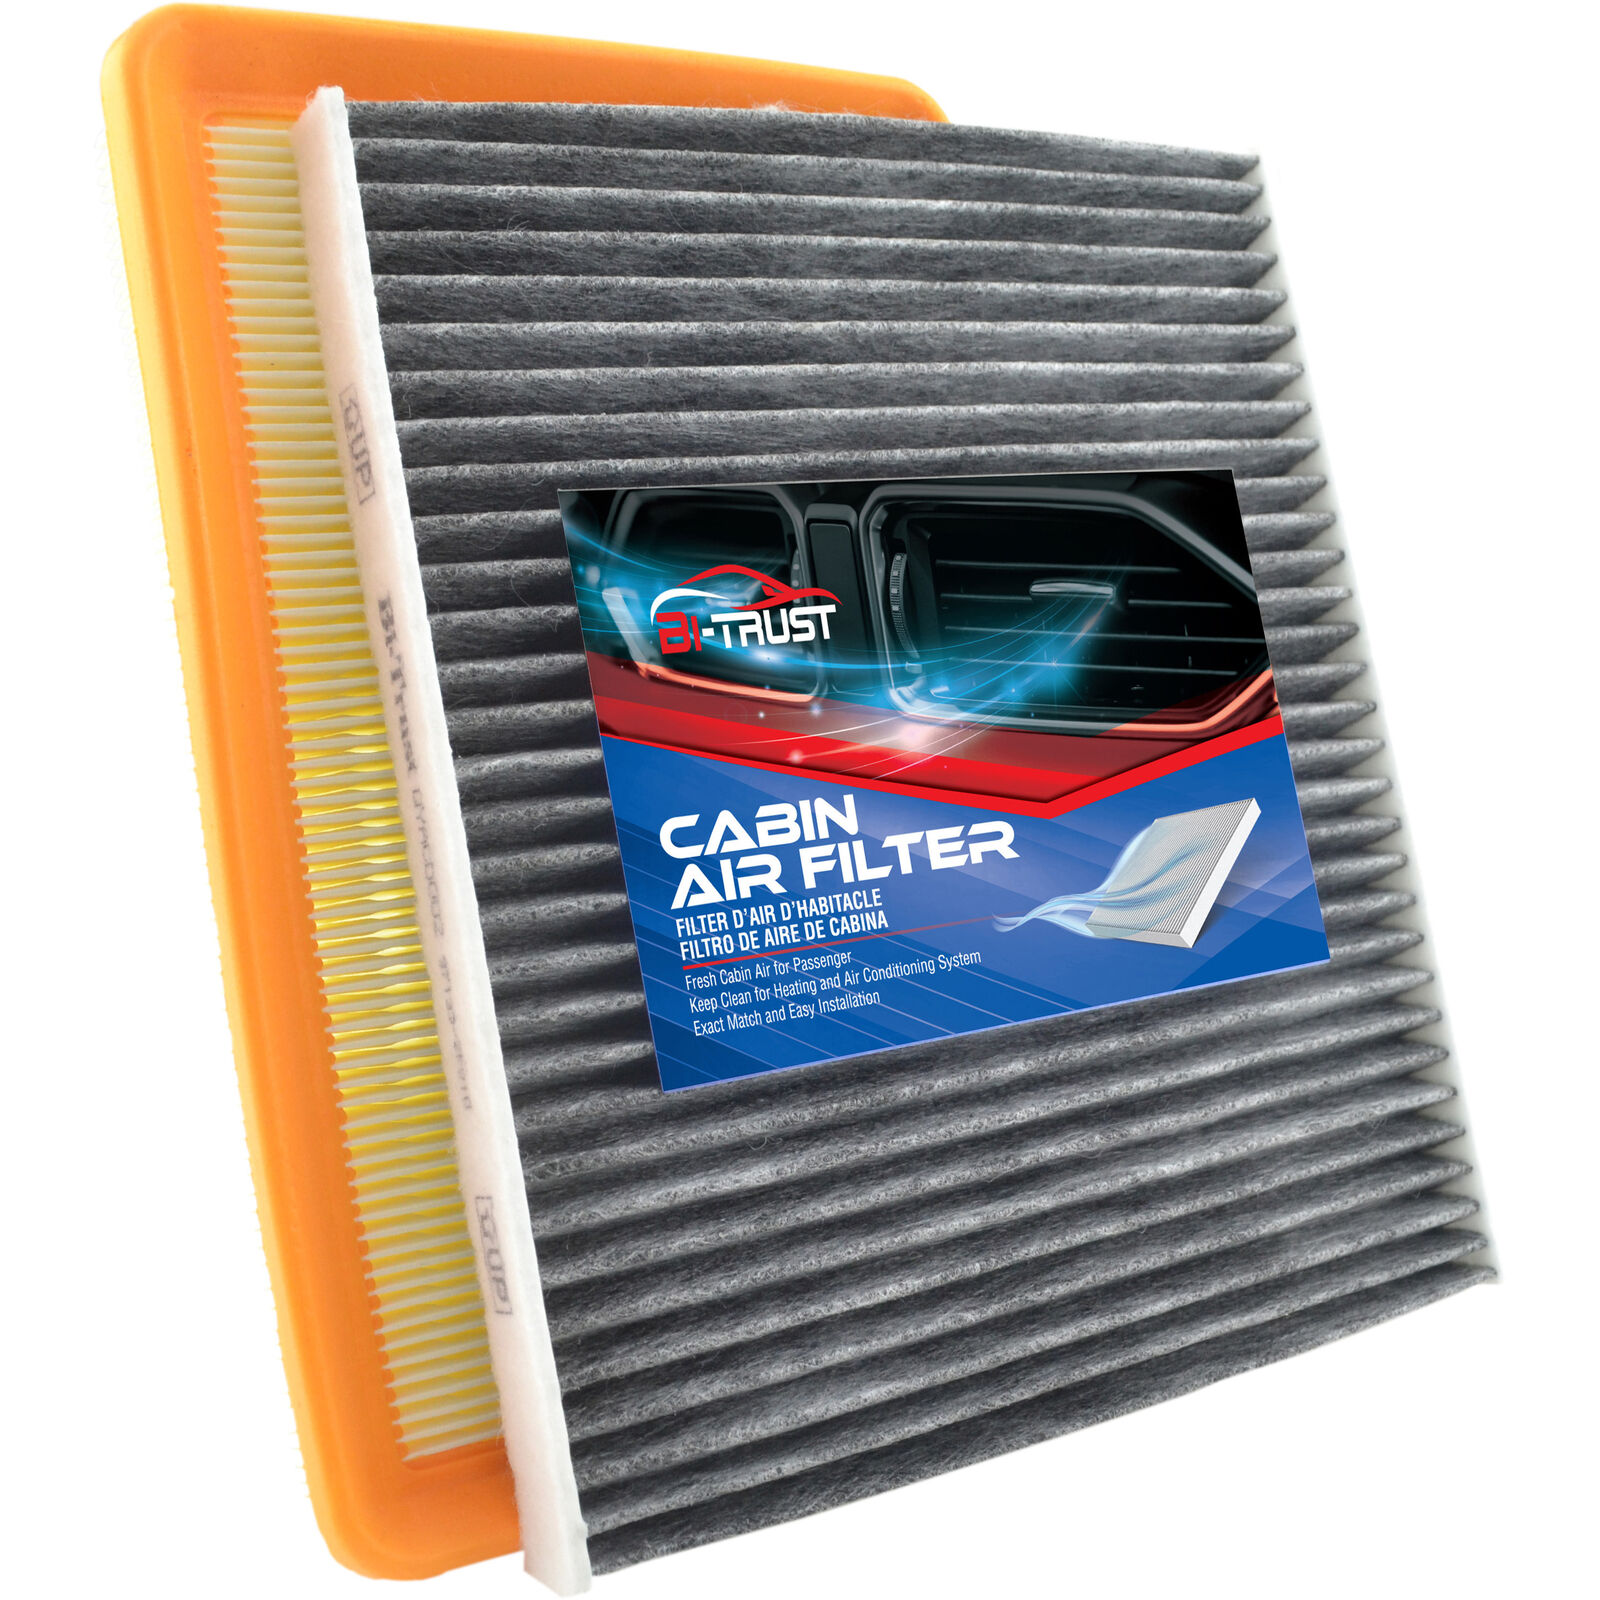 Engine & Cabin Air Filter Combo Set for Kia Spectra Spectra5 2005-2009 2.0L